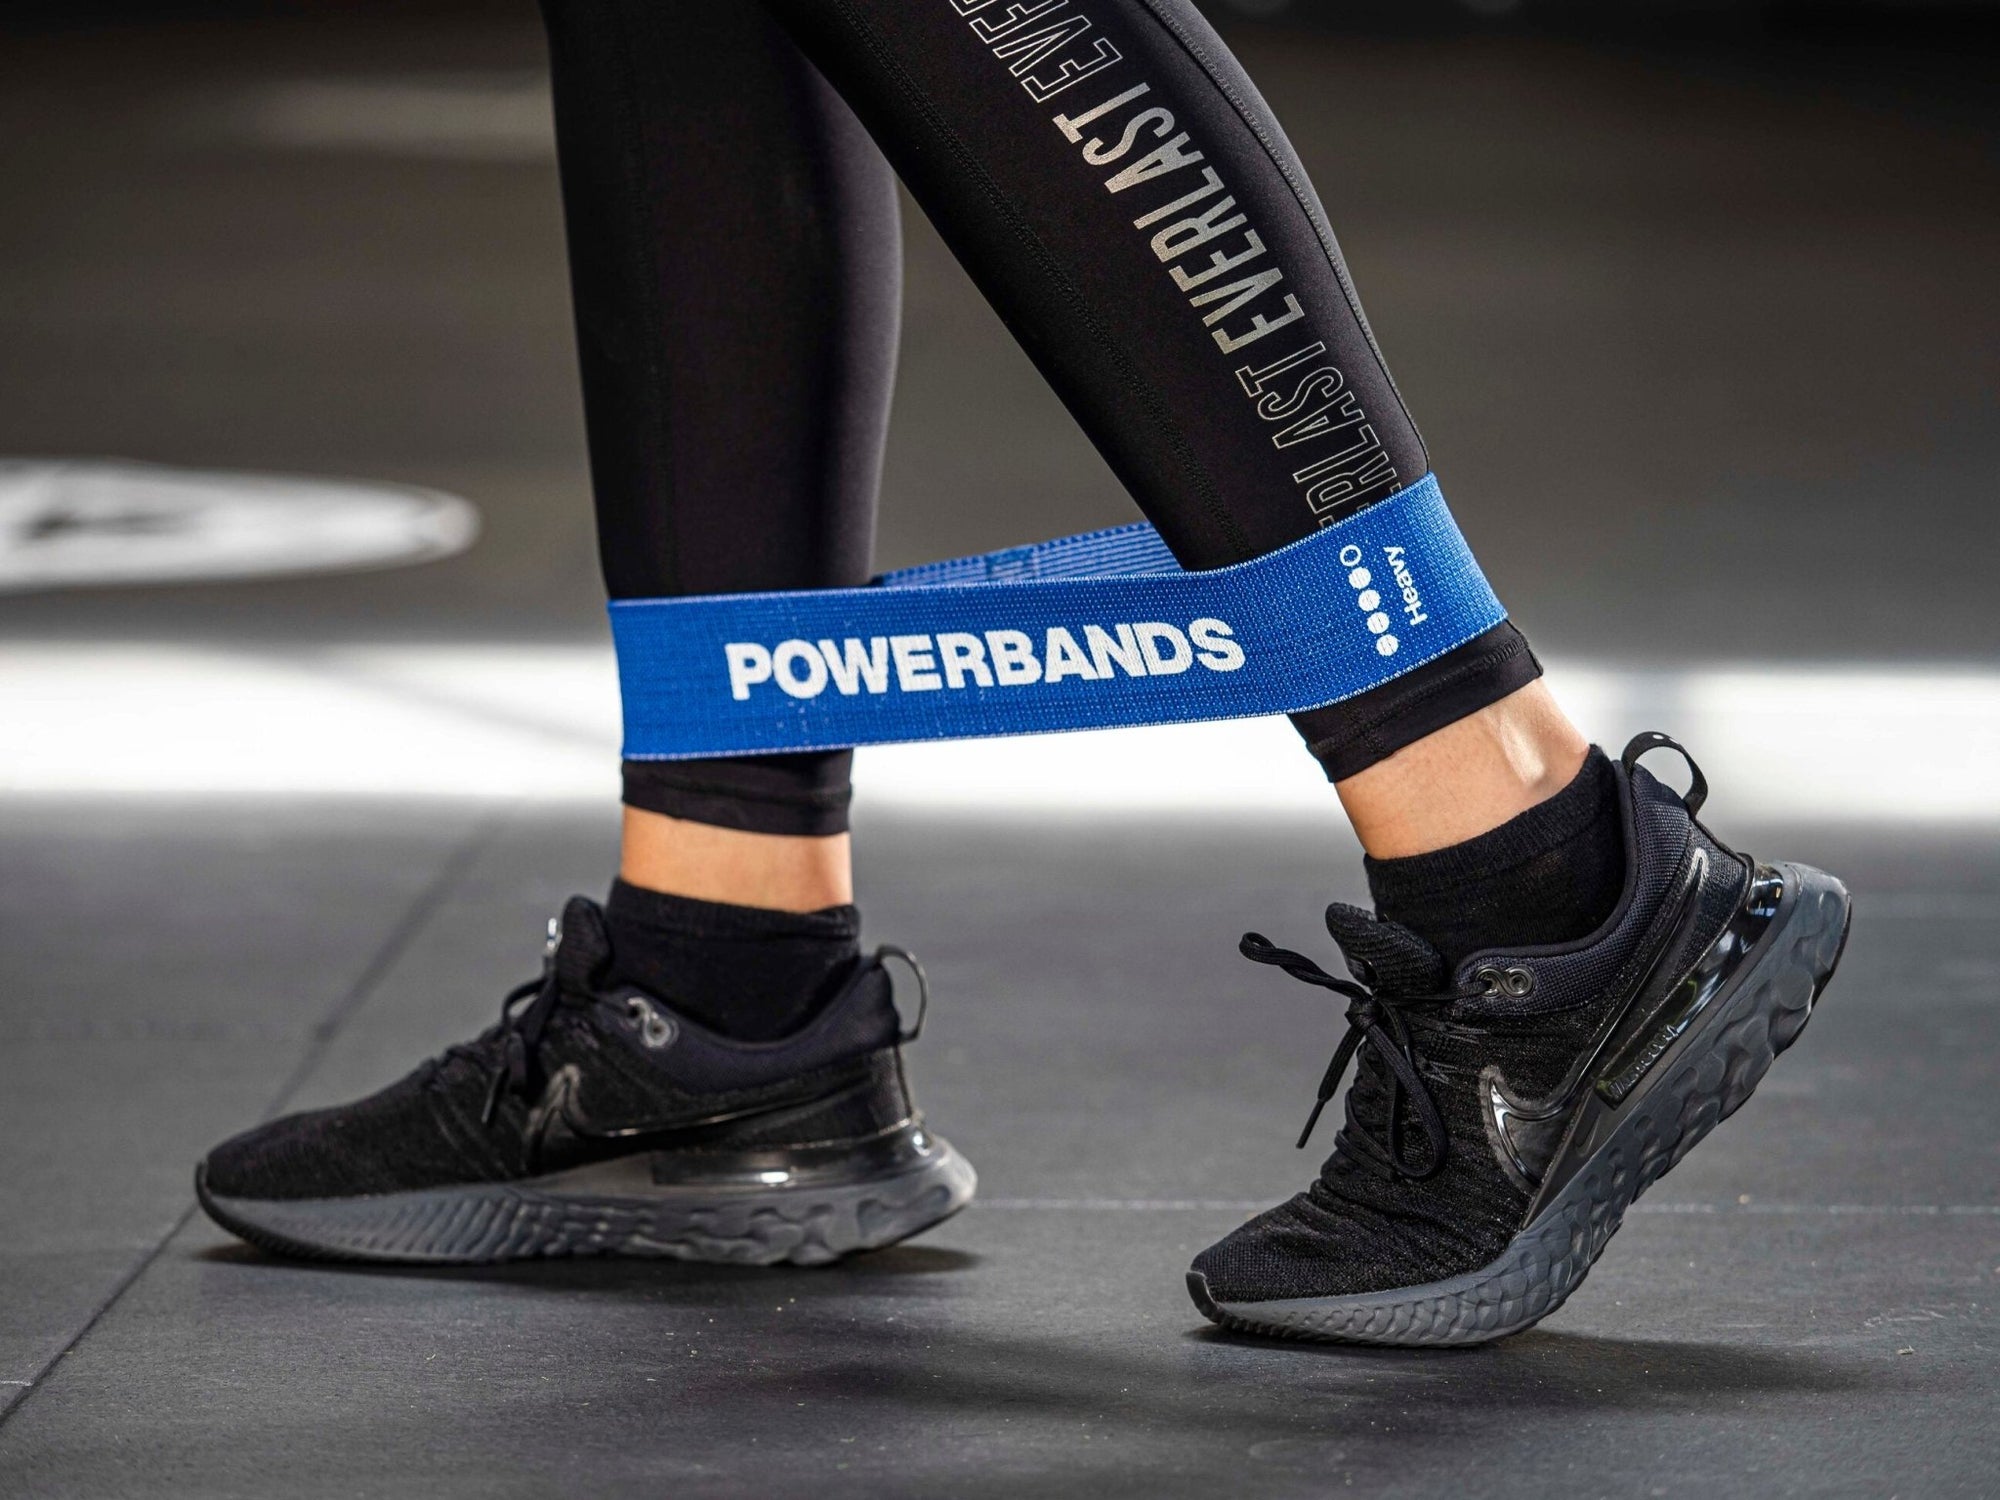 An Explainer on How to Go About Doing the Lateral Band Walk - POWERBANDS®